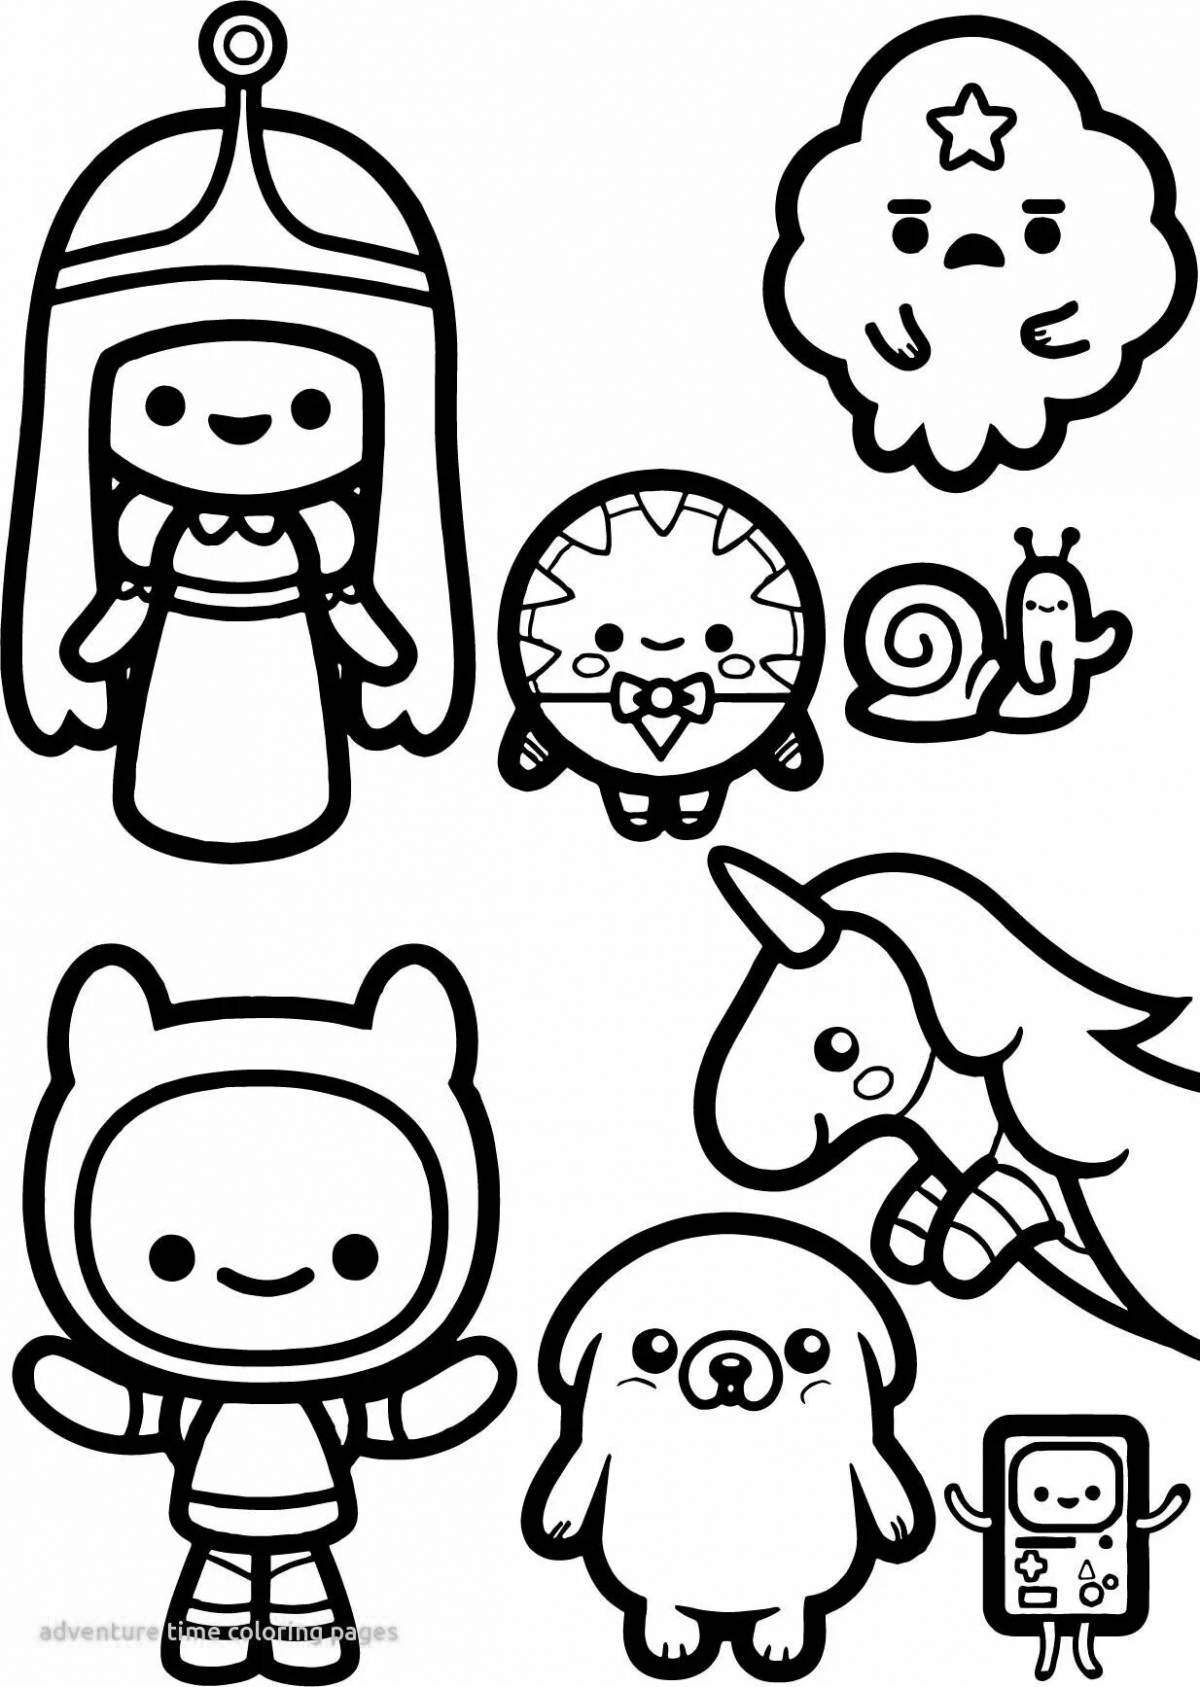 Lively coloring black and white small characters toka boka